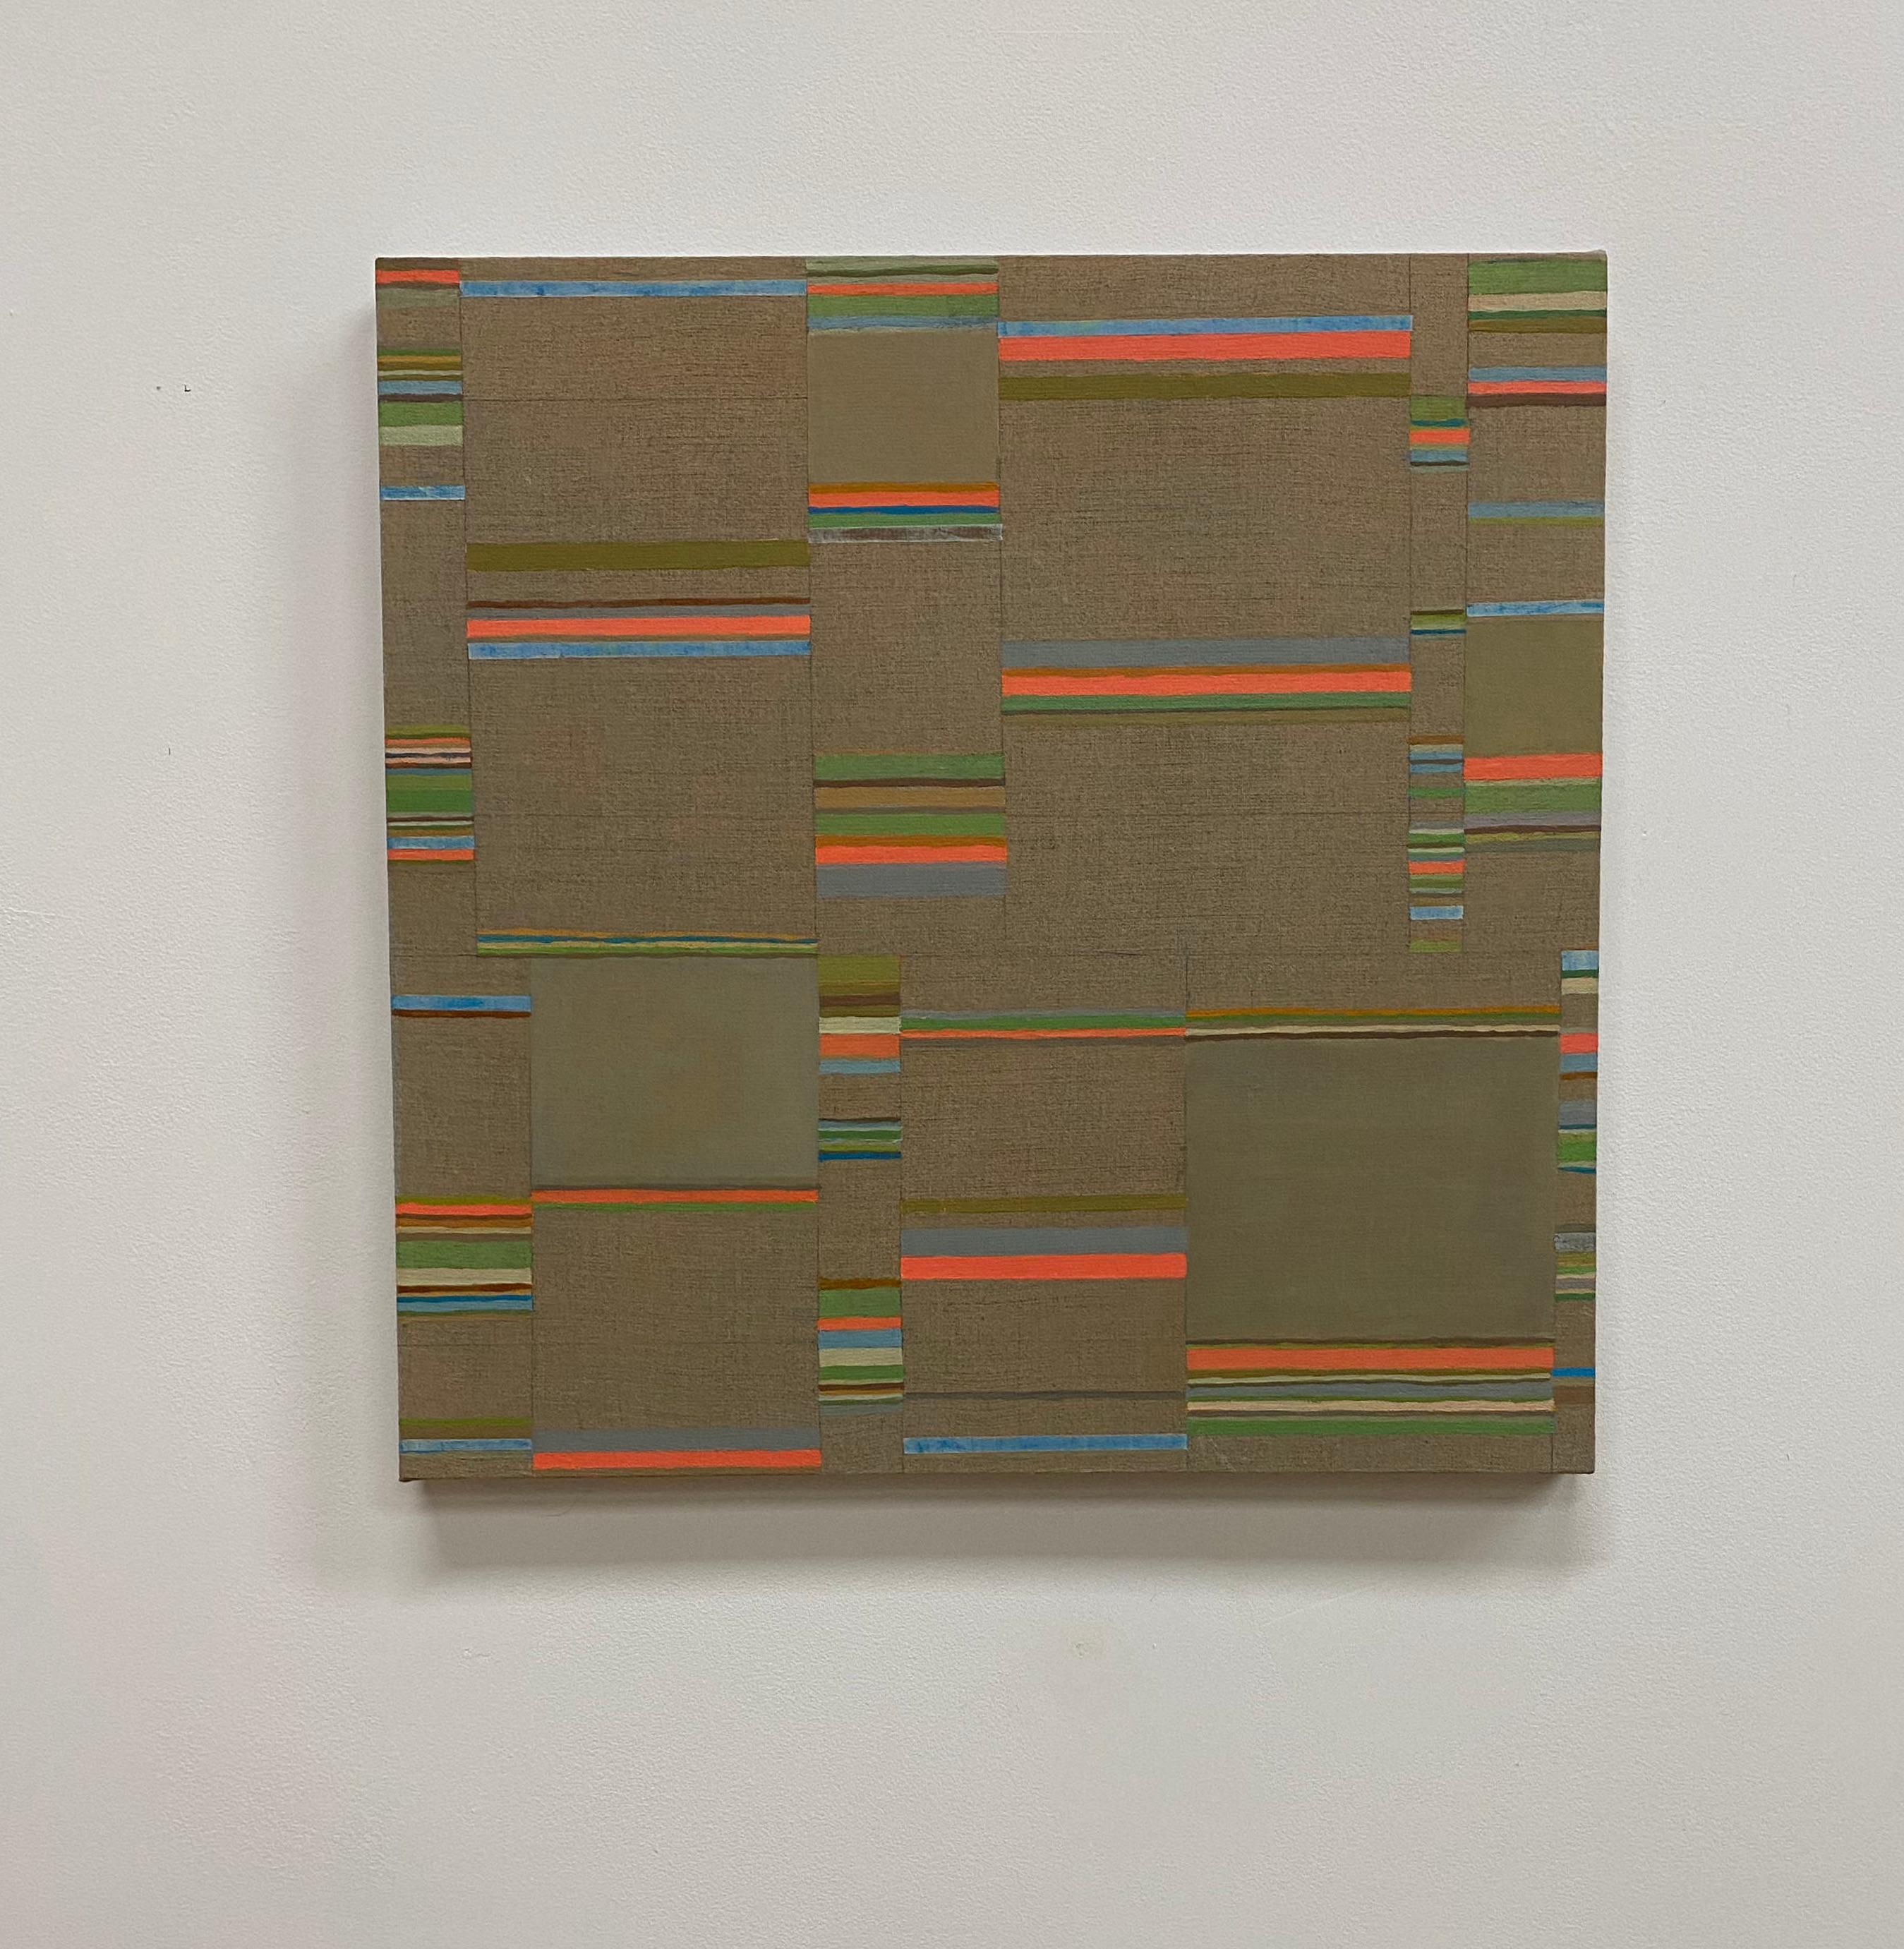 Green Umber Pink, Coral, Green, Brown, Olive, Teal Blue, Stripes - Painting by Elizabeth Gourlay